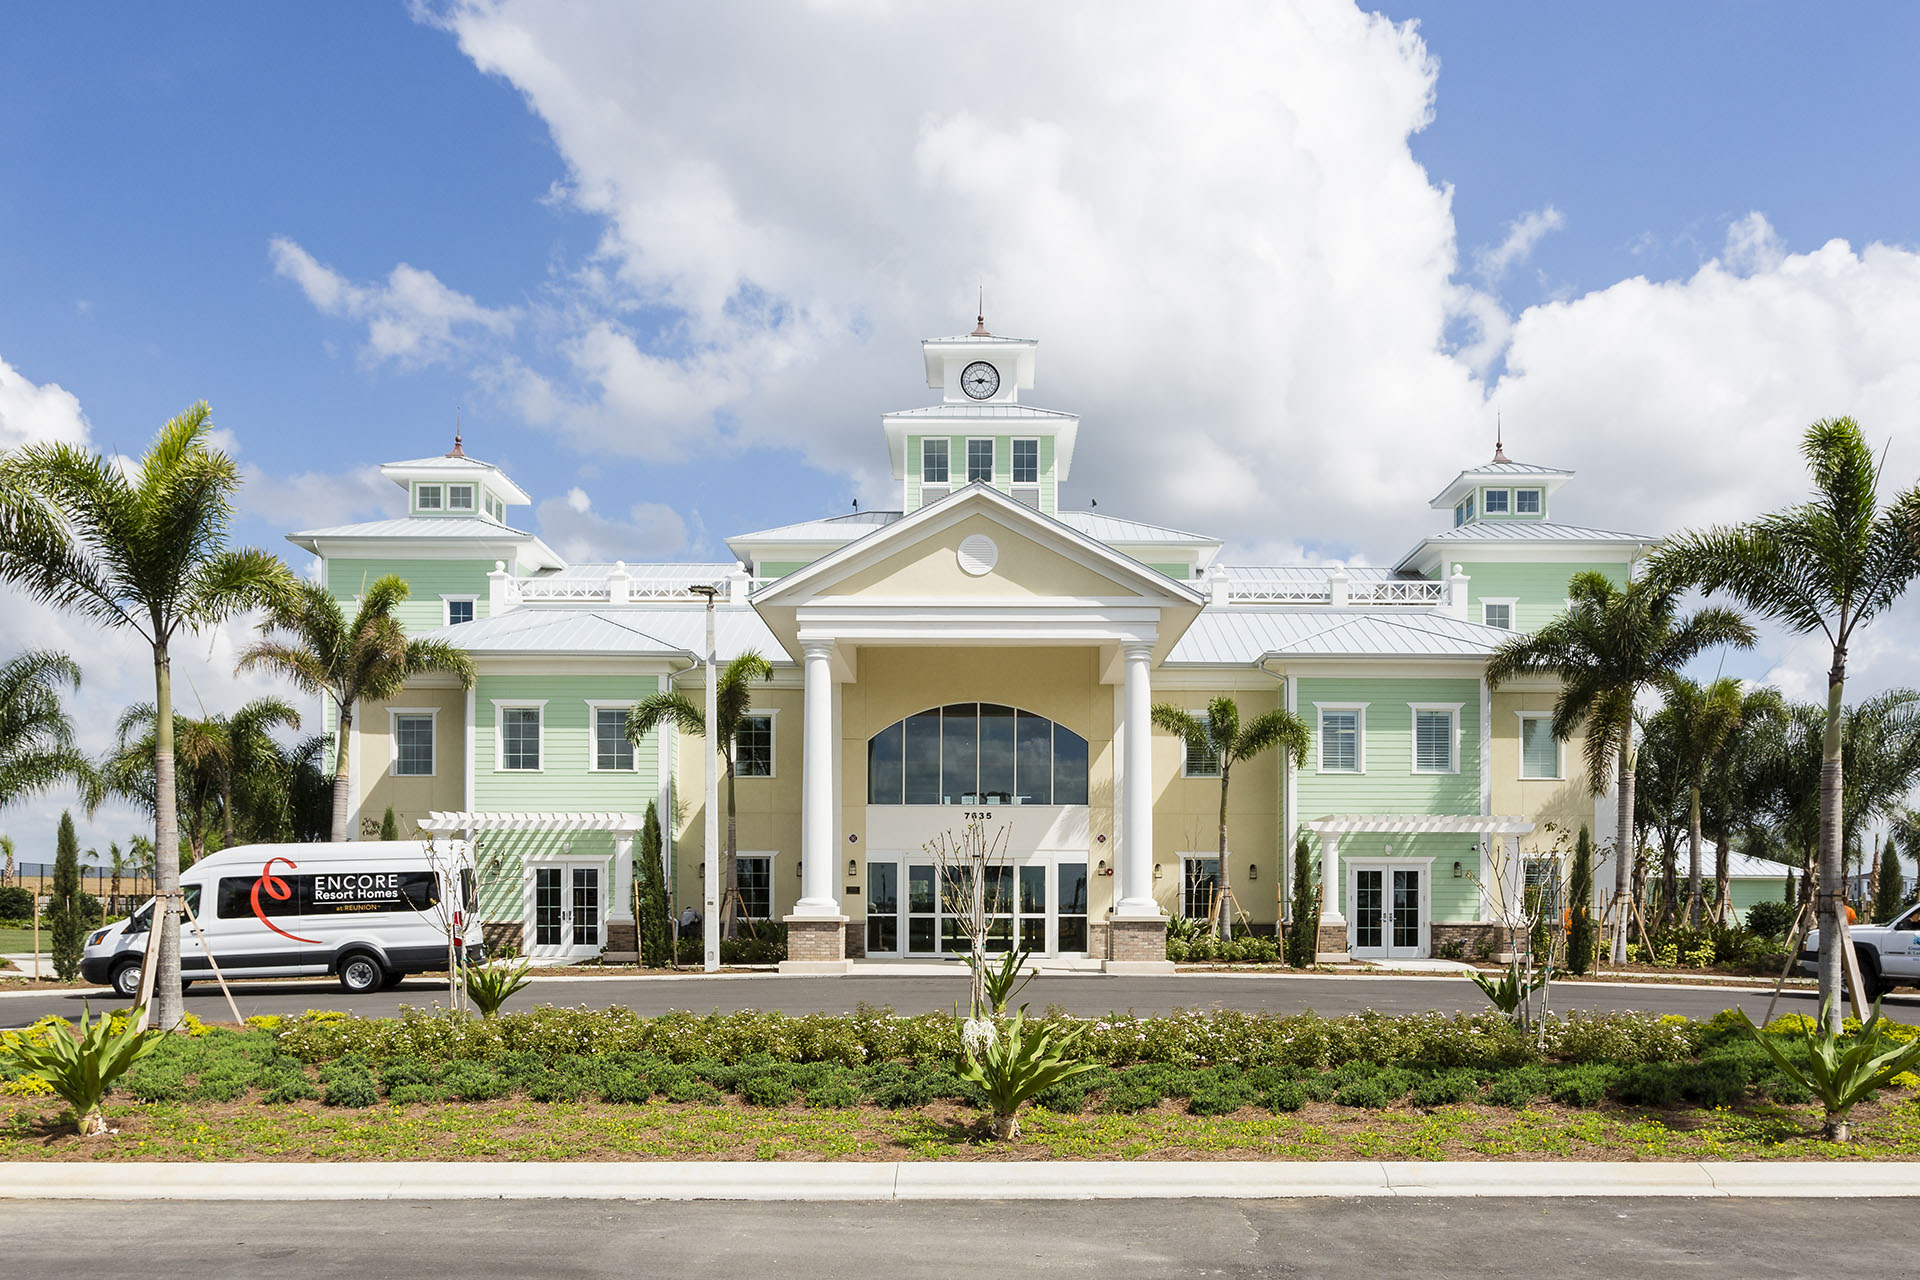 Large pale yellow and green building with large driveway in front and palm trees surrounding. There is a small white bus outside for Encore Resort.